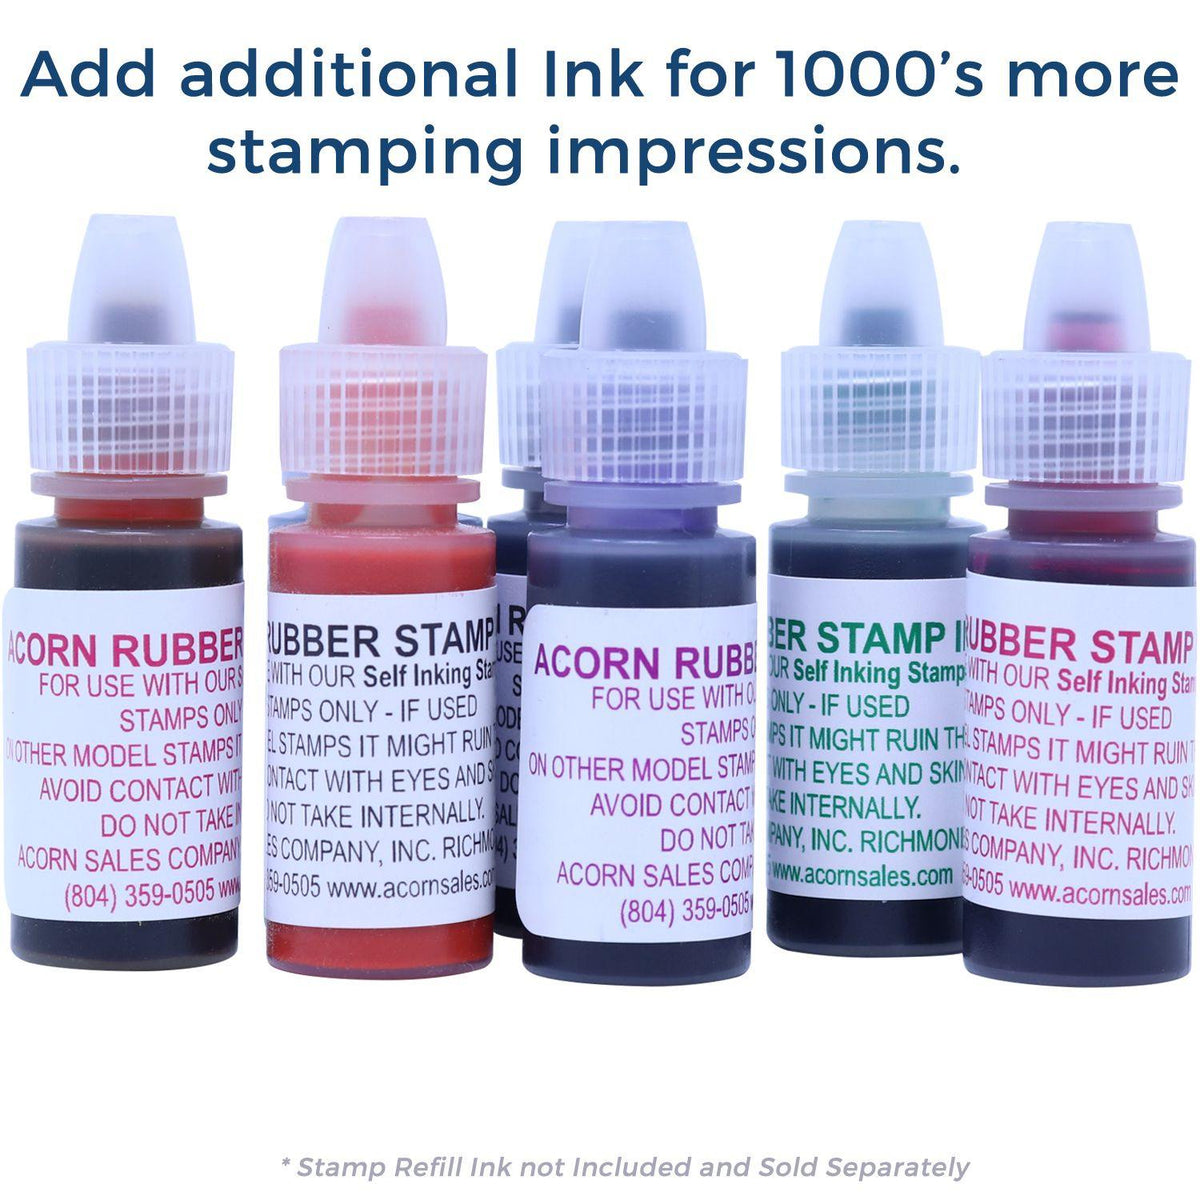 Refill Inks for Large Pre-Inked Received in Damaged Condition Stamp Available